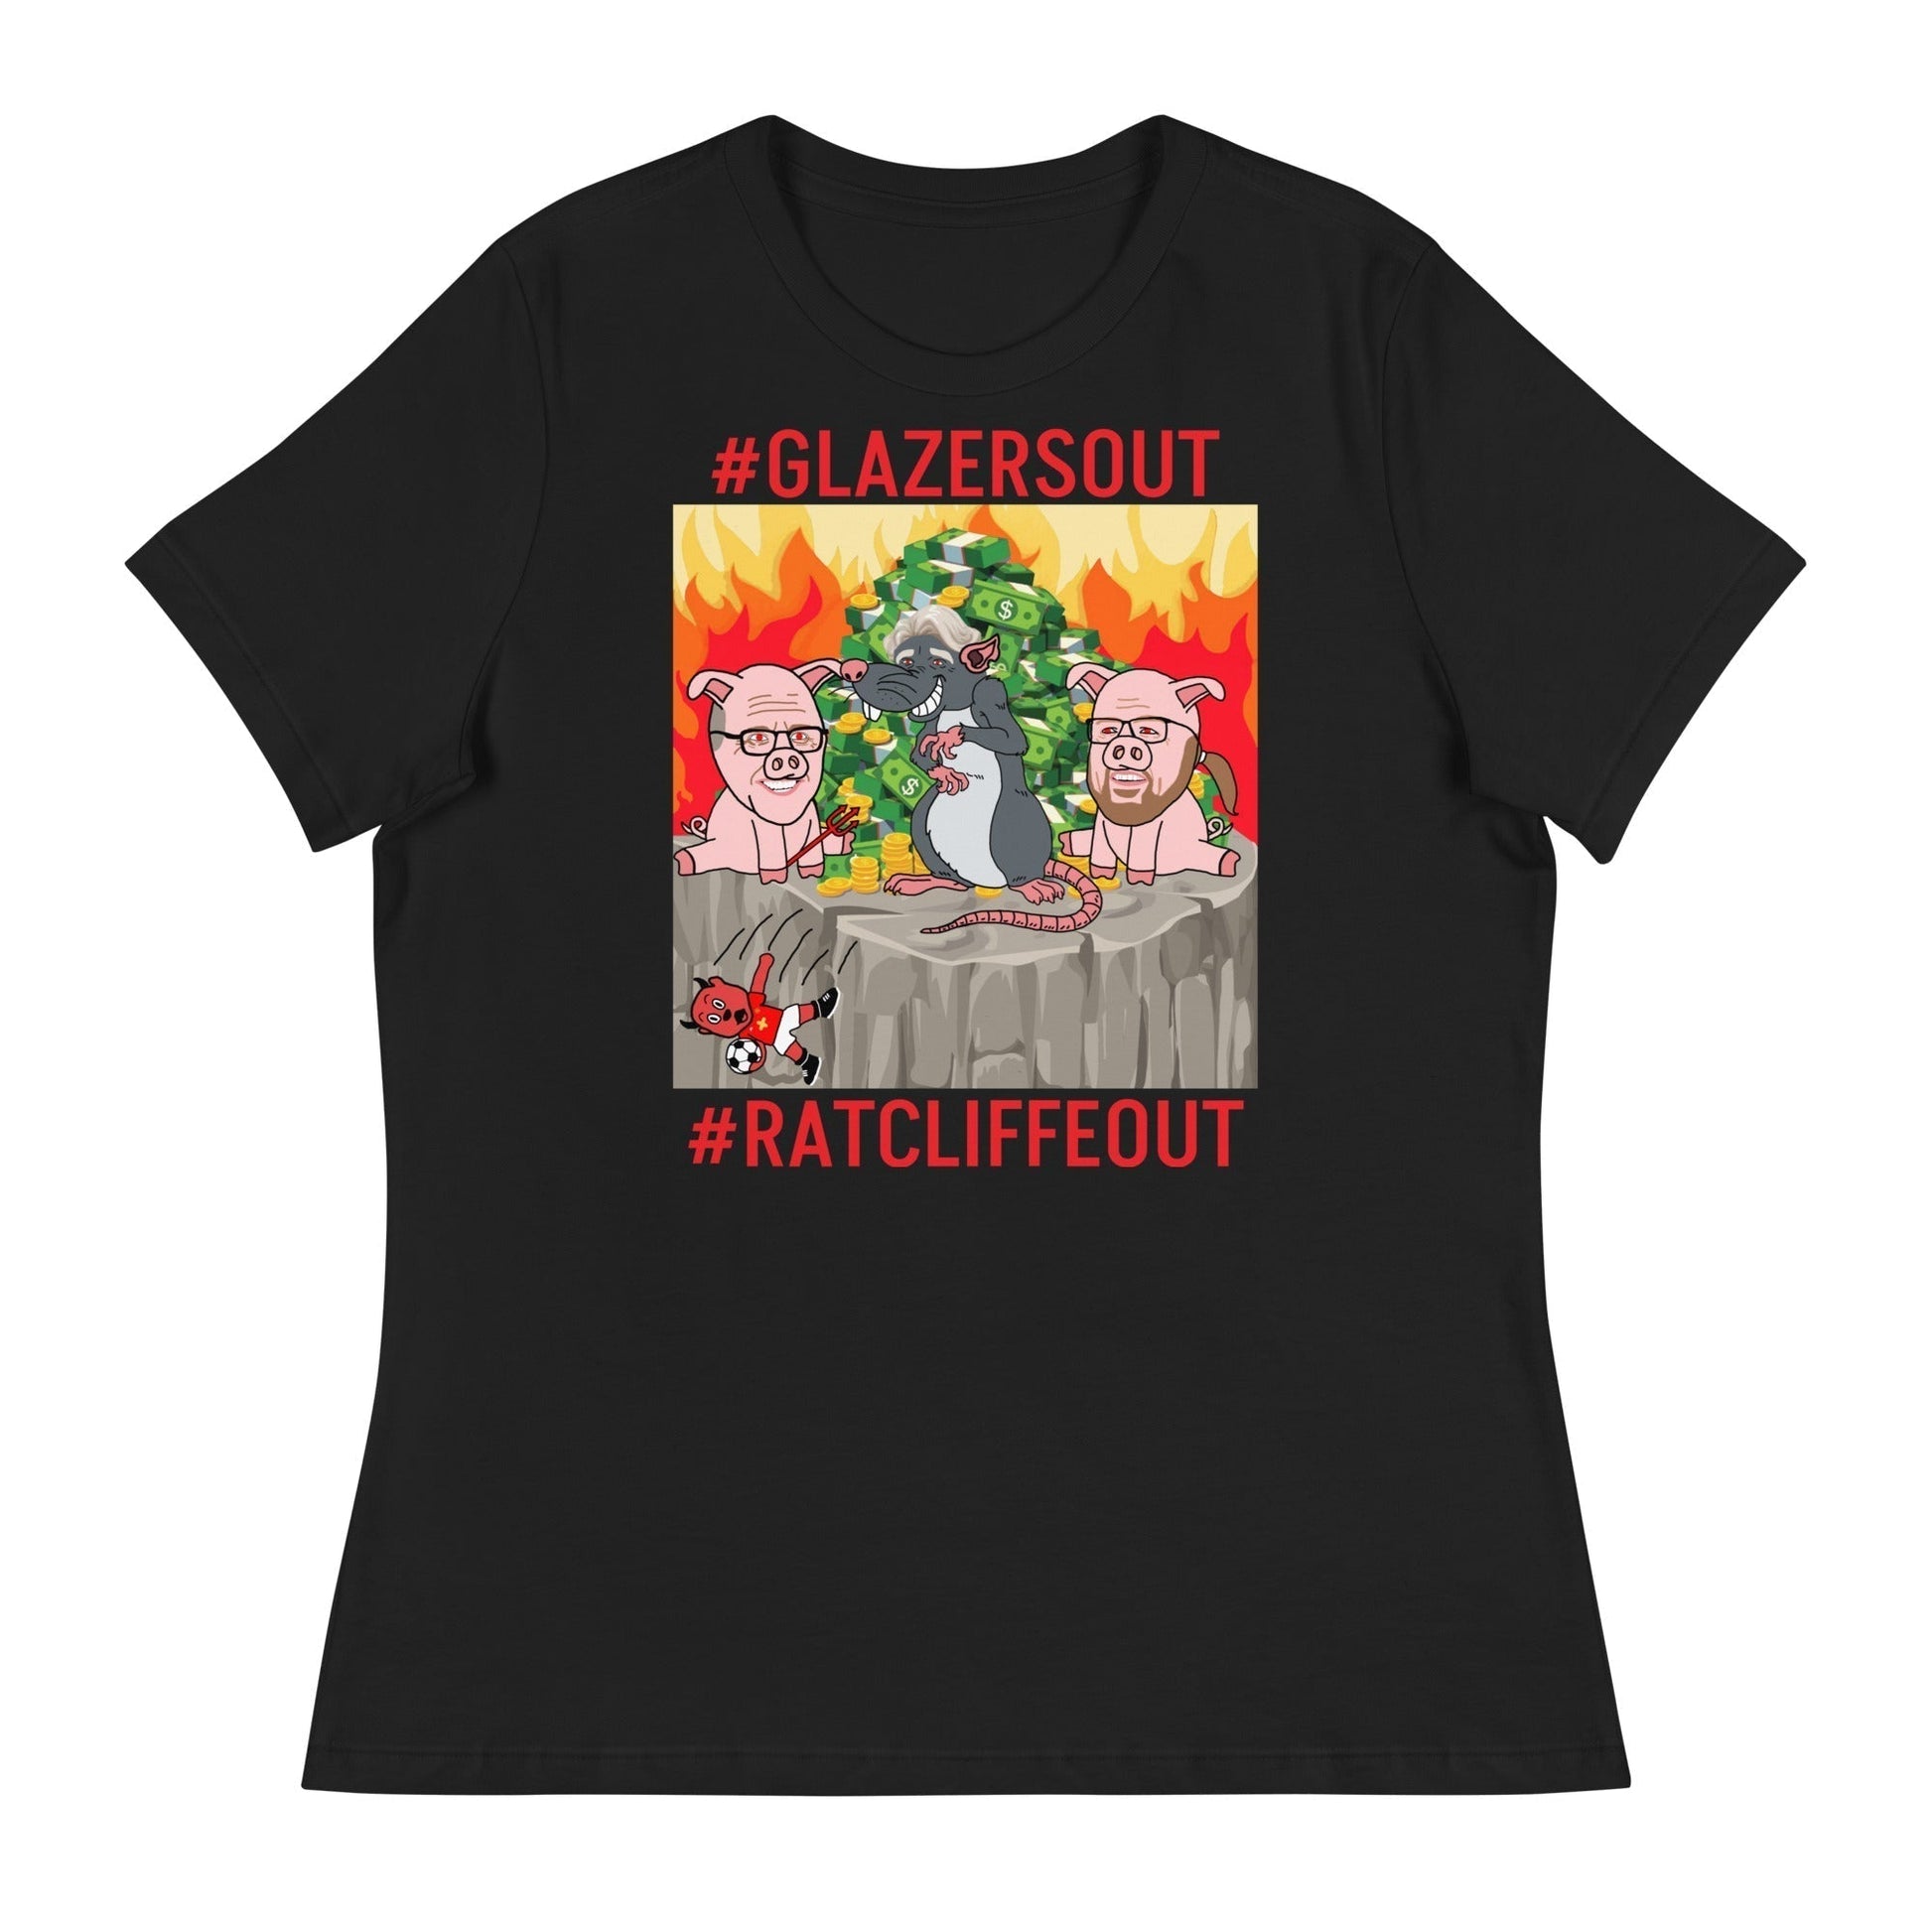 Manchester United Ratcliffe Out, Glazers Out Women's Relaxed Fit T-Shirt, Red Letters, #GlazersOut #RatcliffeOut Next Cult Brand Football, GlazersOut, Manchester United, RatcliffeOut